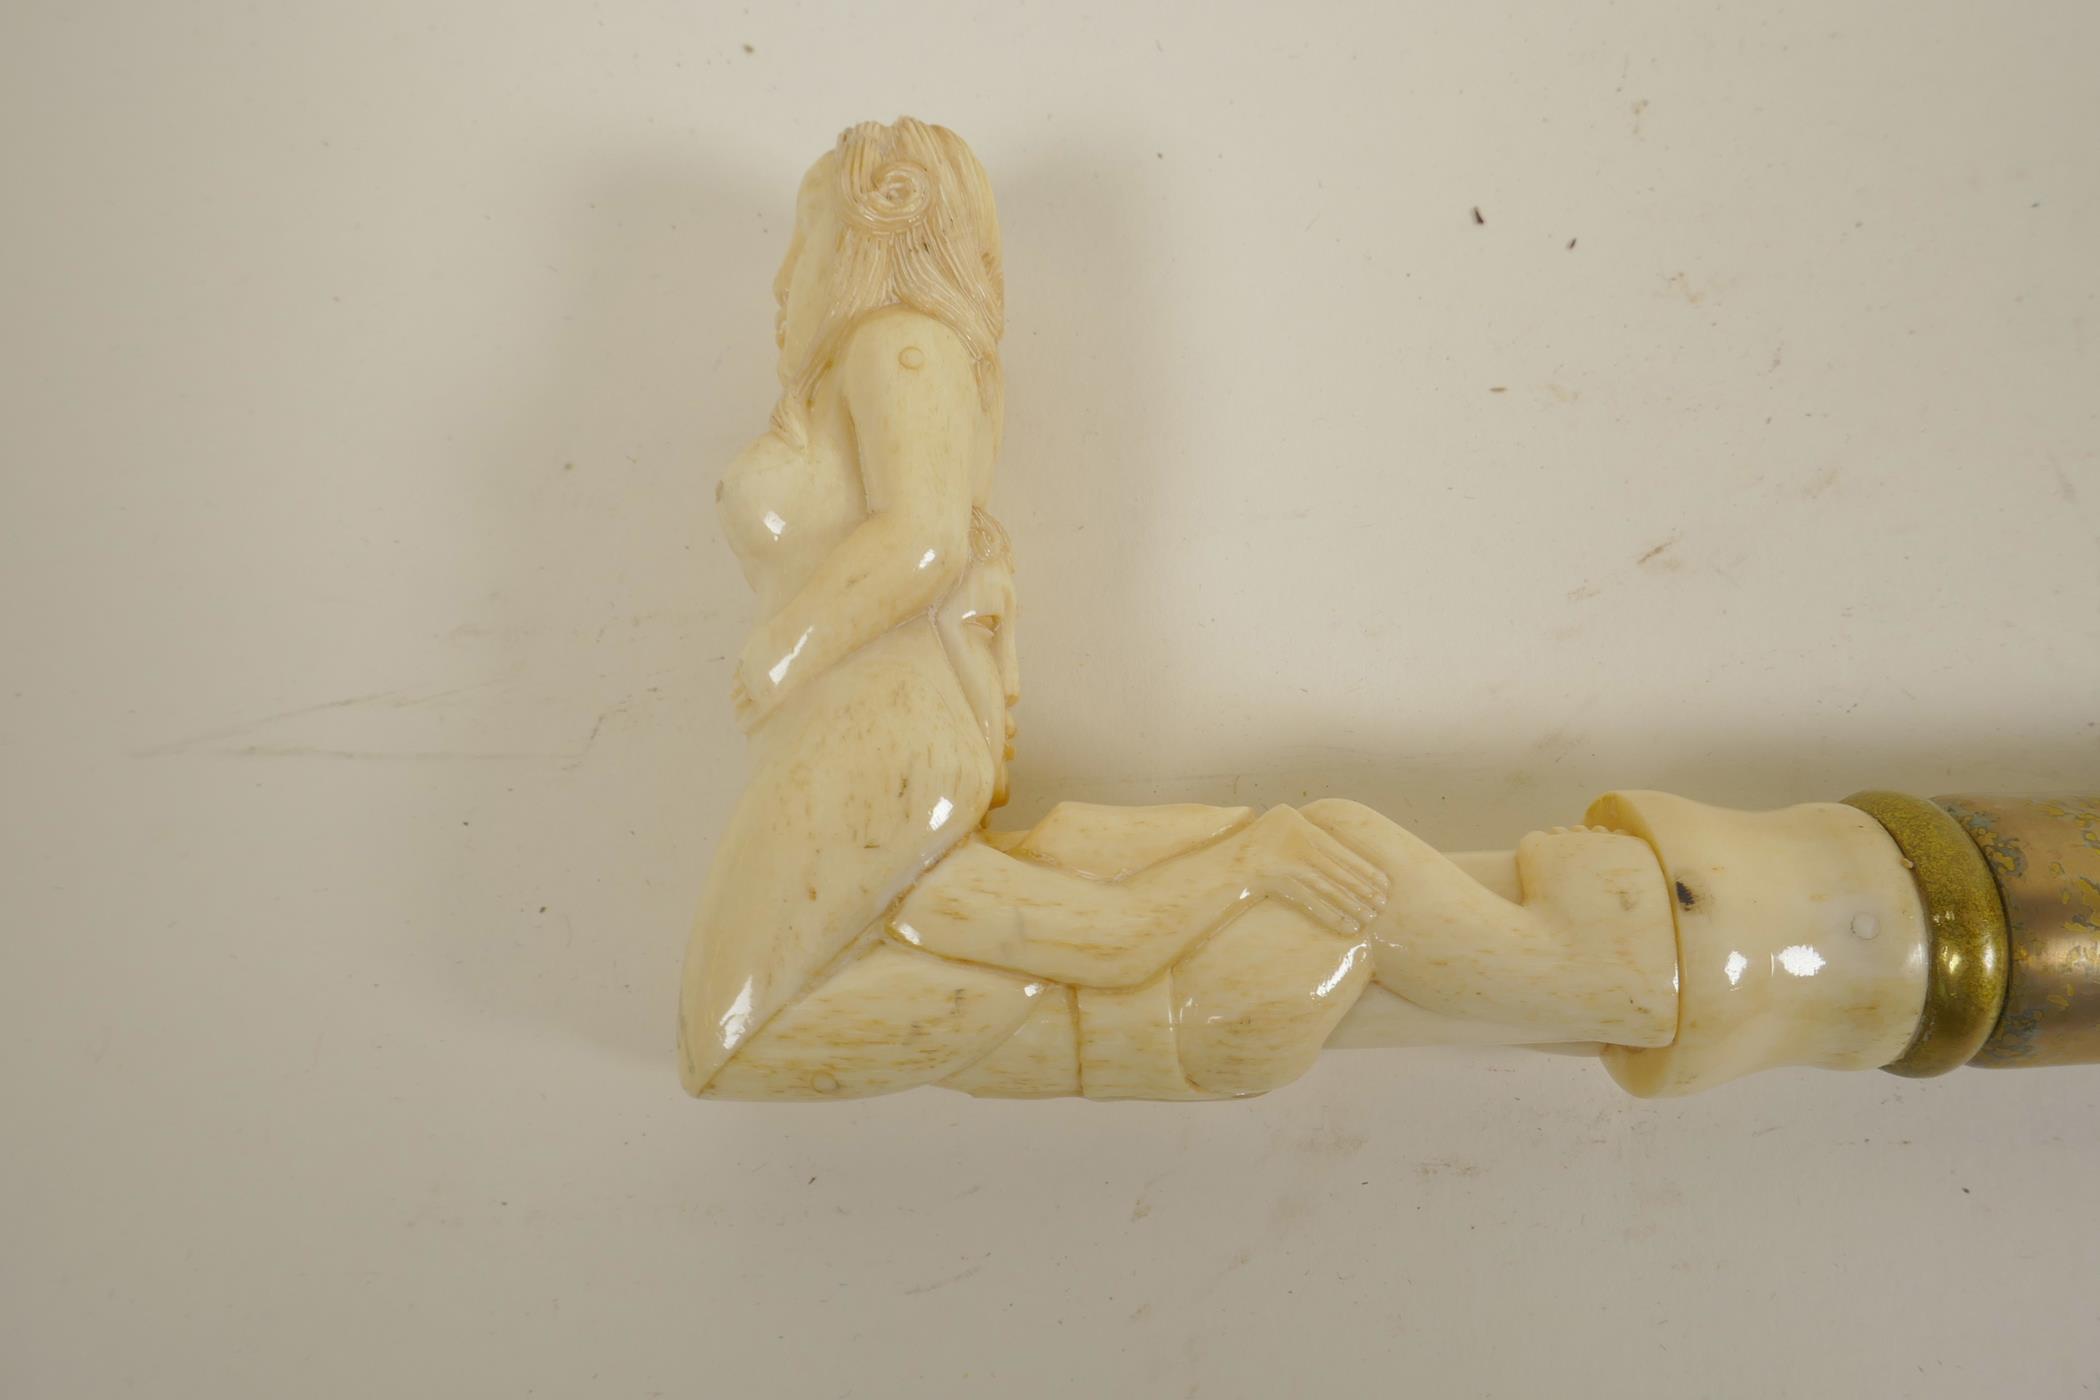 A hardwood walking stick with bone handle carved as erotic figures, 36" long - Image 3 of 4